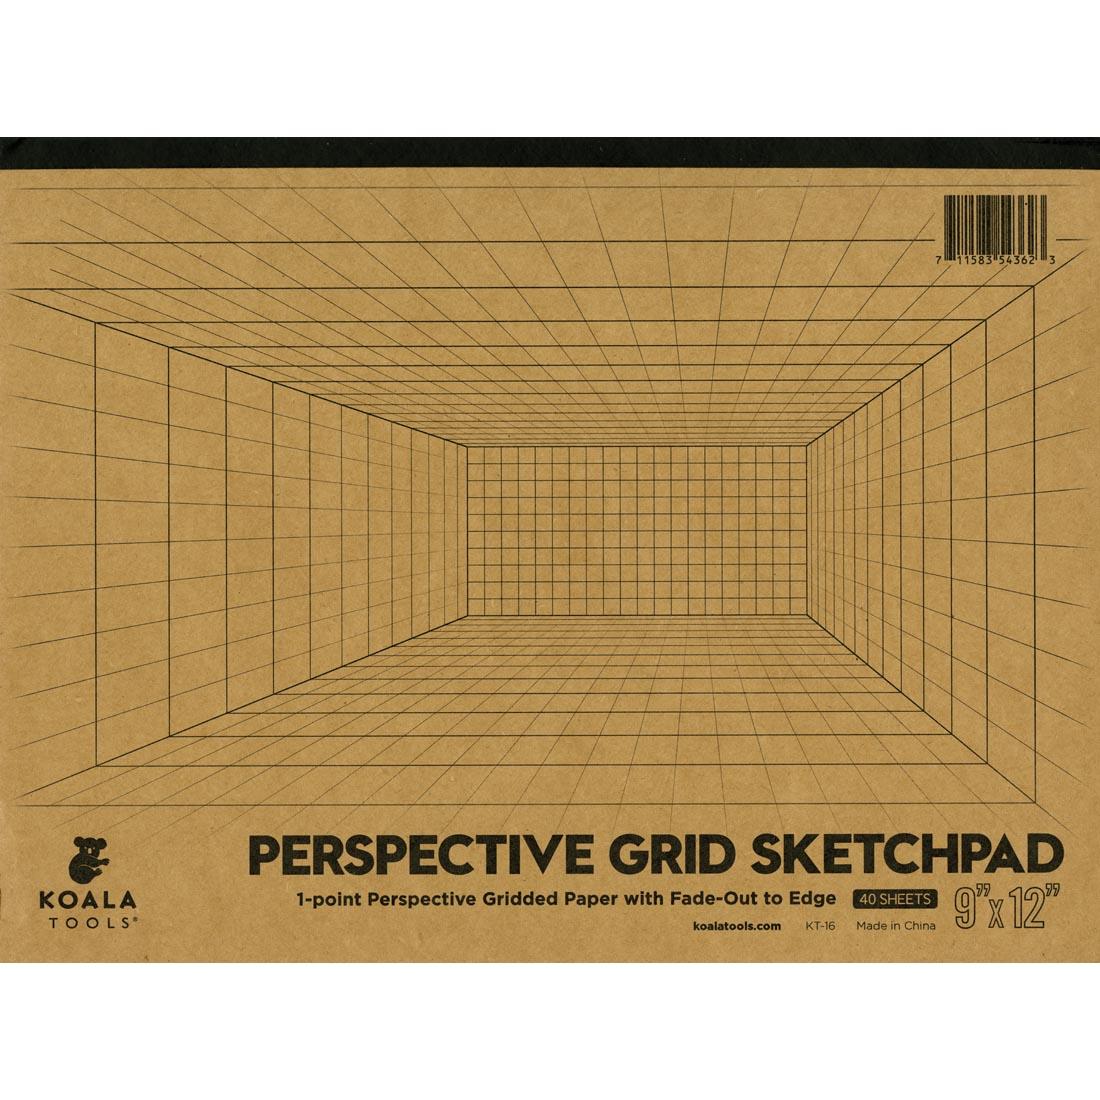 Koala Tools 1-Point Perspective Grid Sketchpad